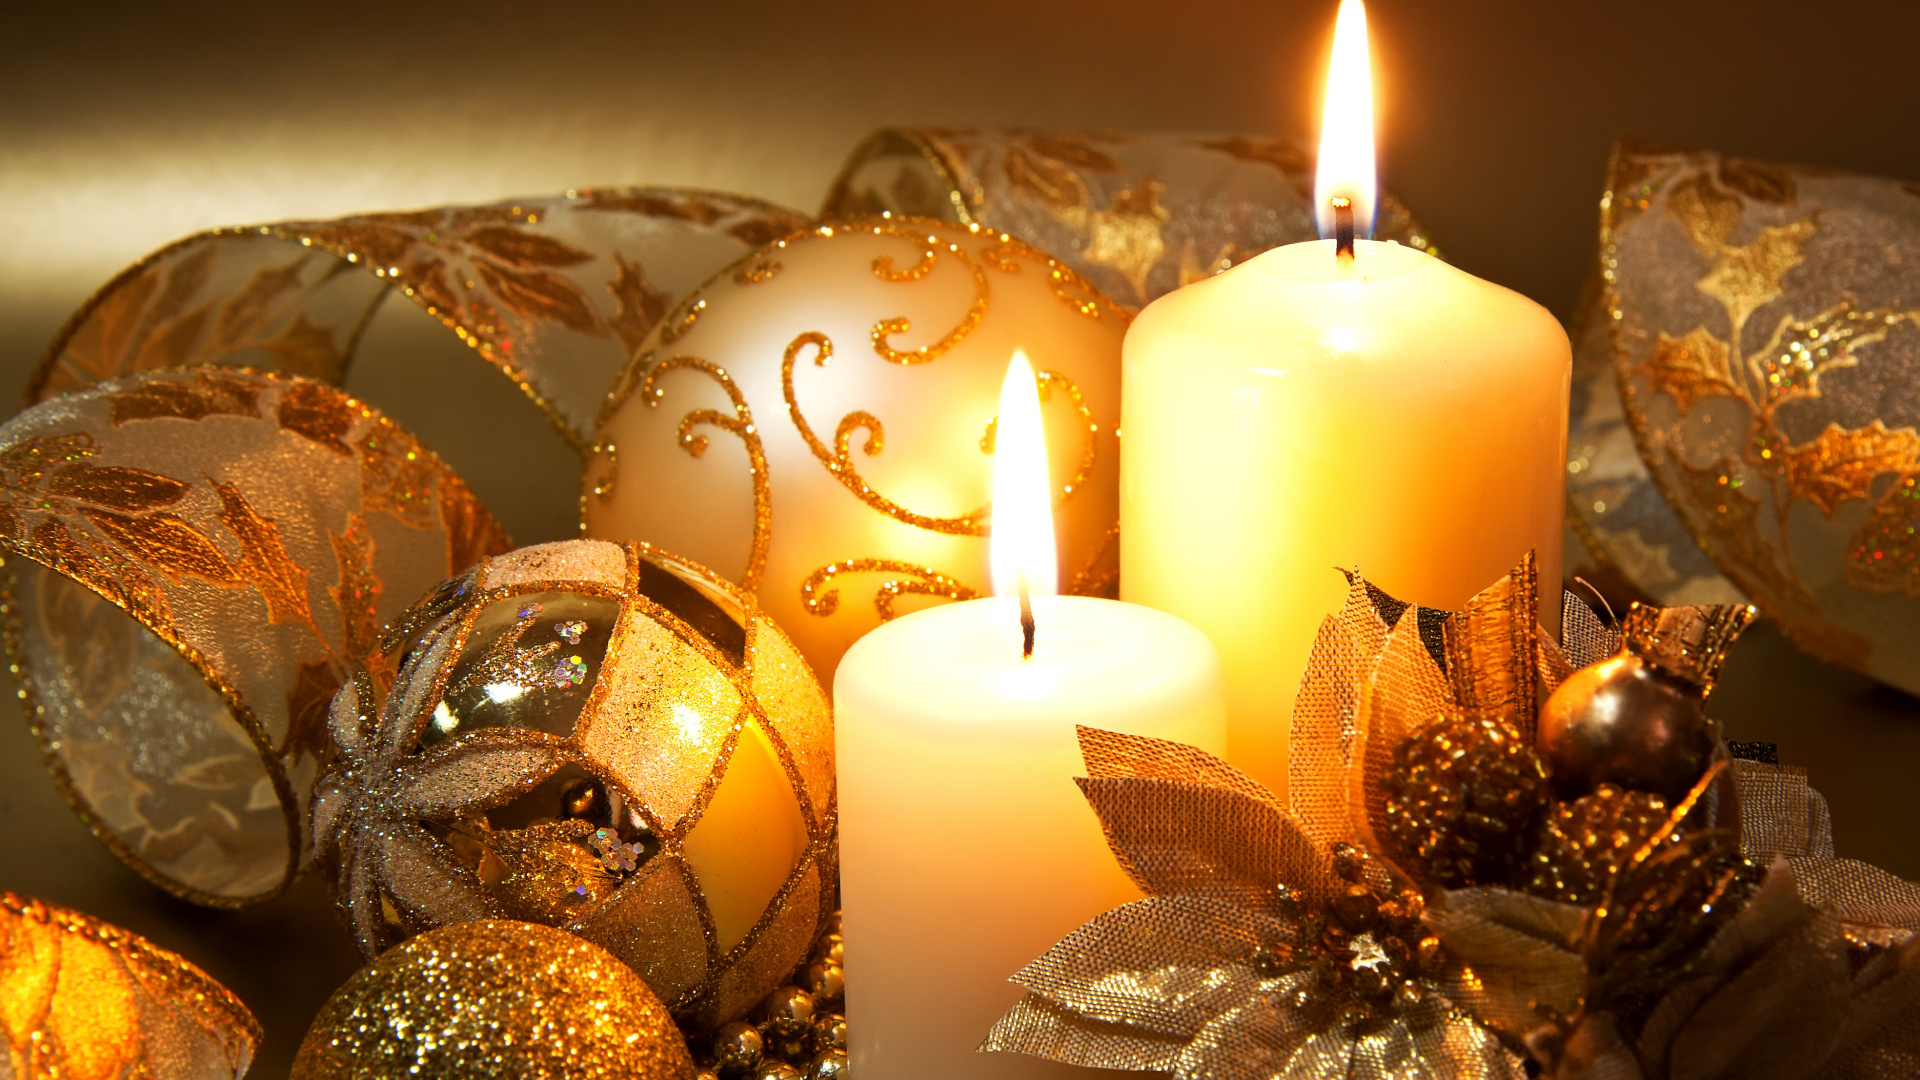 Christmas Decoration, Christmas Day, Christmas Ornament, Candle, Still Life. Wallpaper in 1920x1080 Resolution